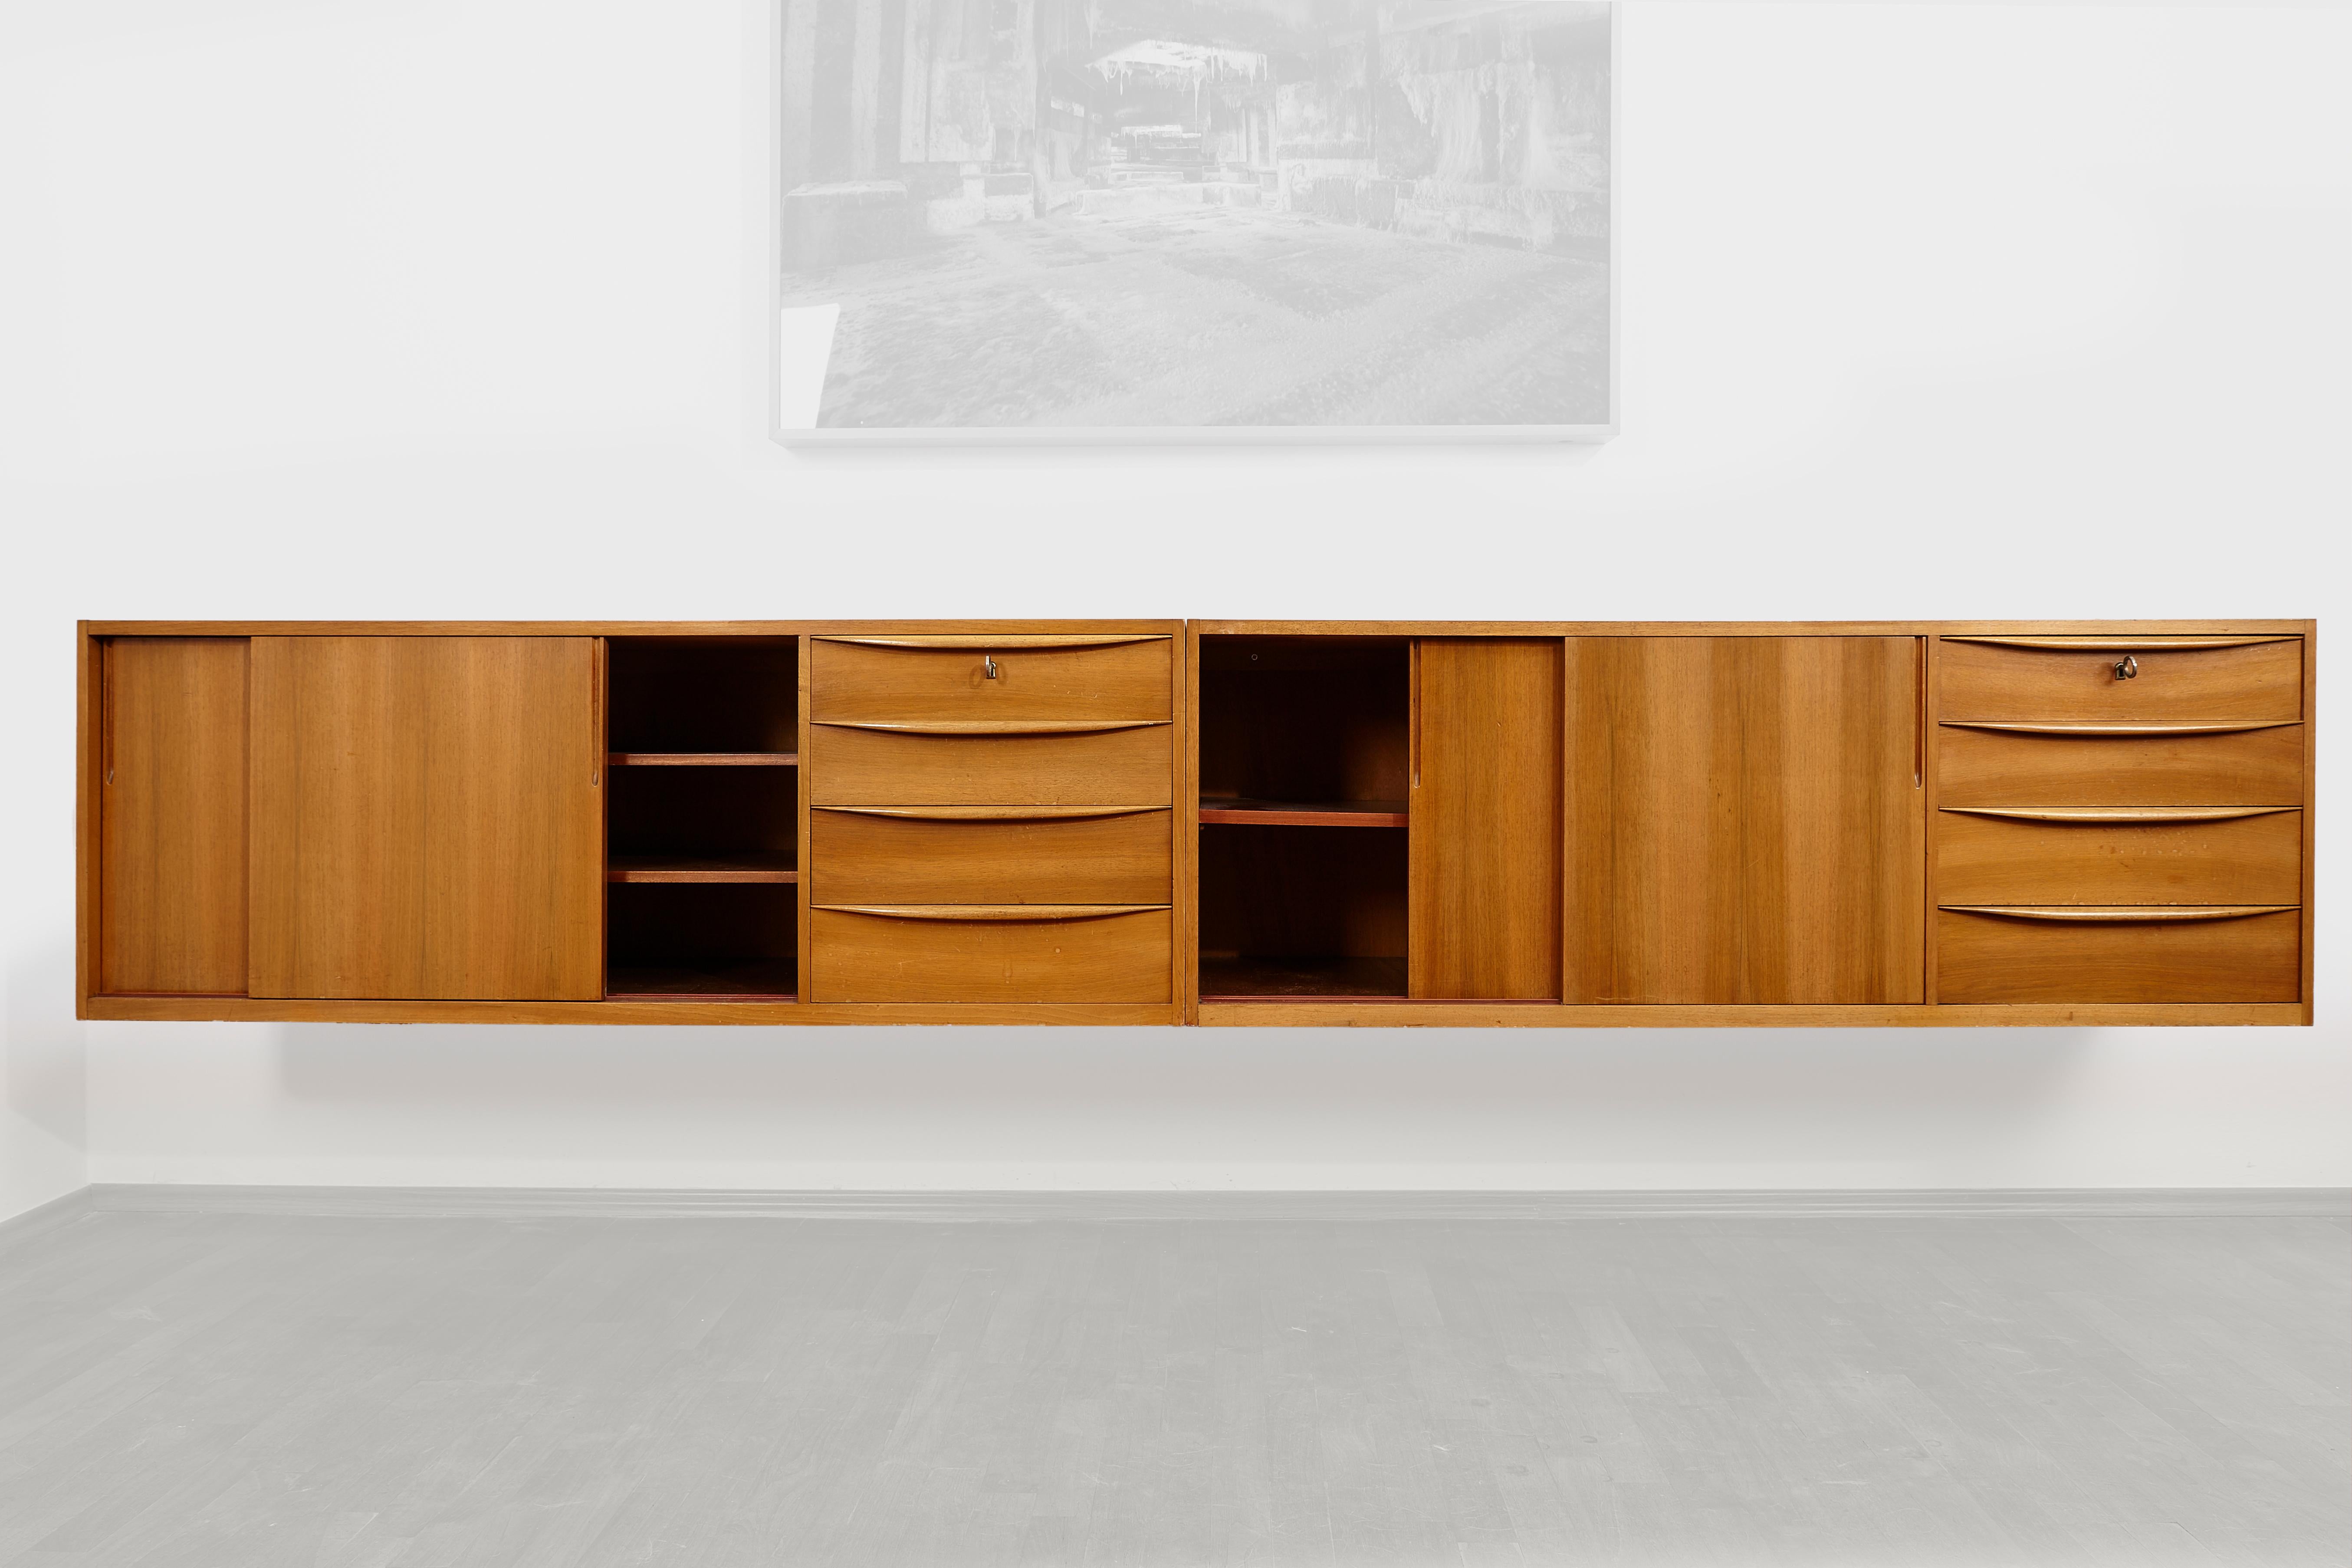 Two identical floating sideboards with sliding doors and unique elegant drawers in seldom walnut veneer. The sideboards are suspended and can complete each other or be separated.